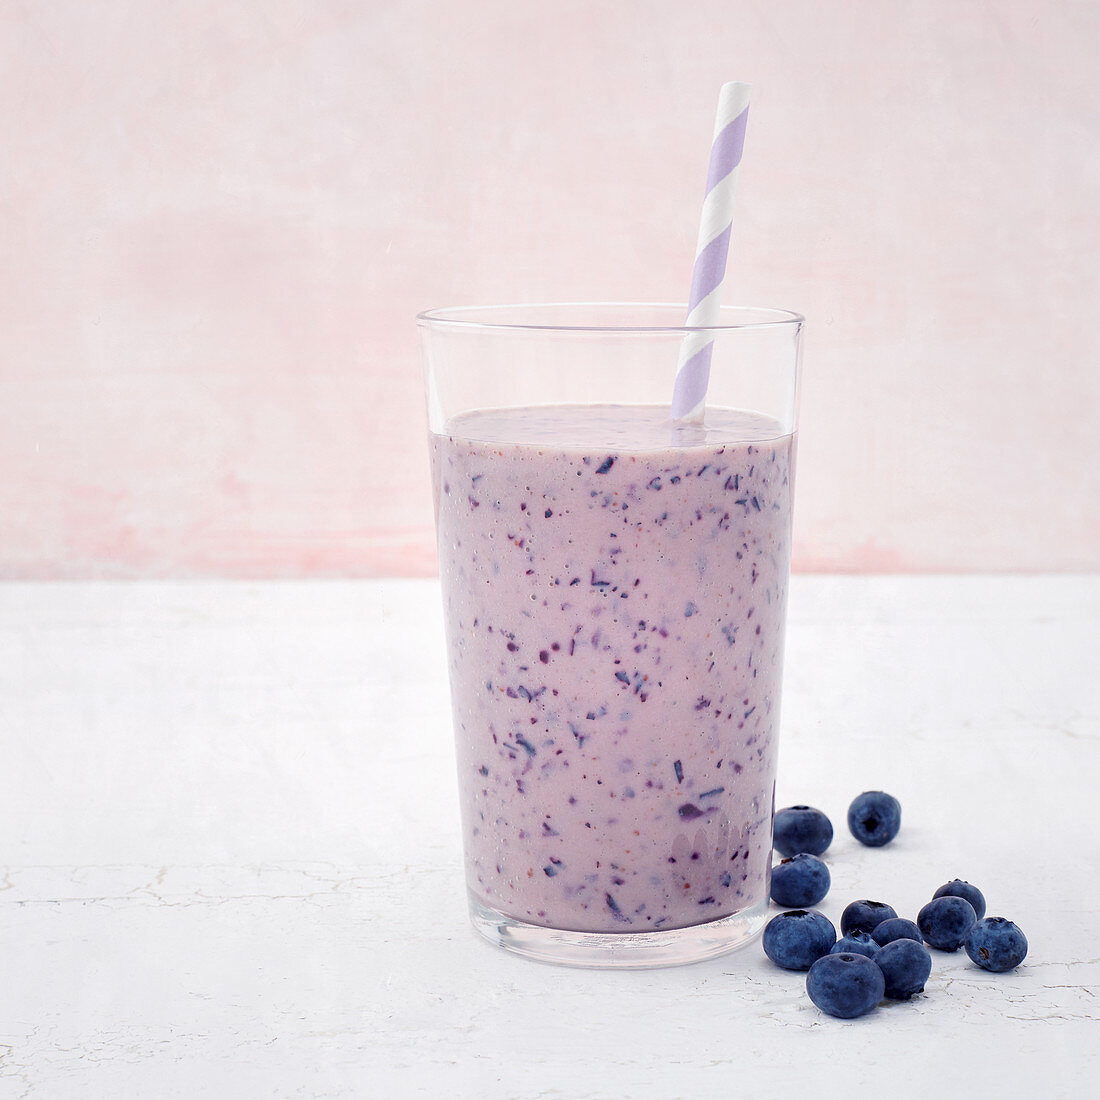 Blueberry and banana buttermilk with cinnamon